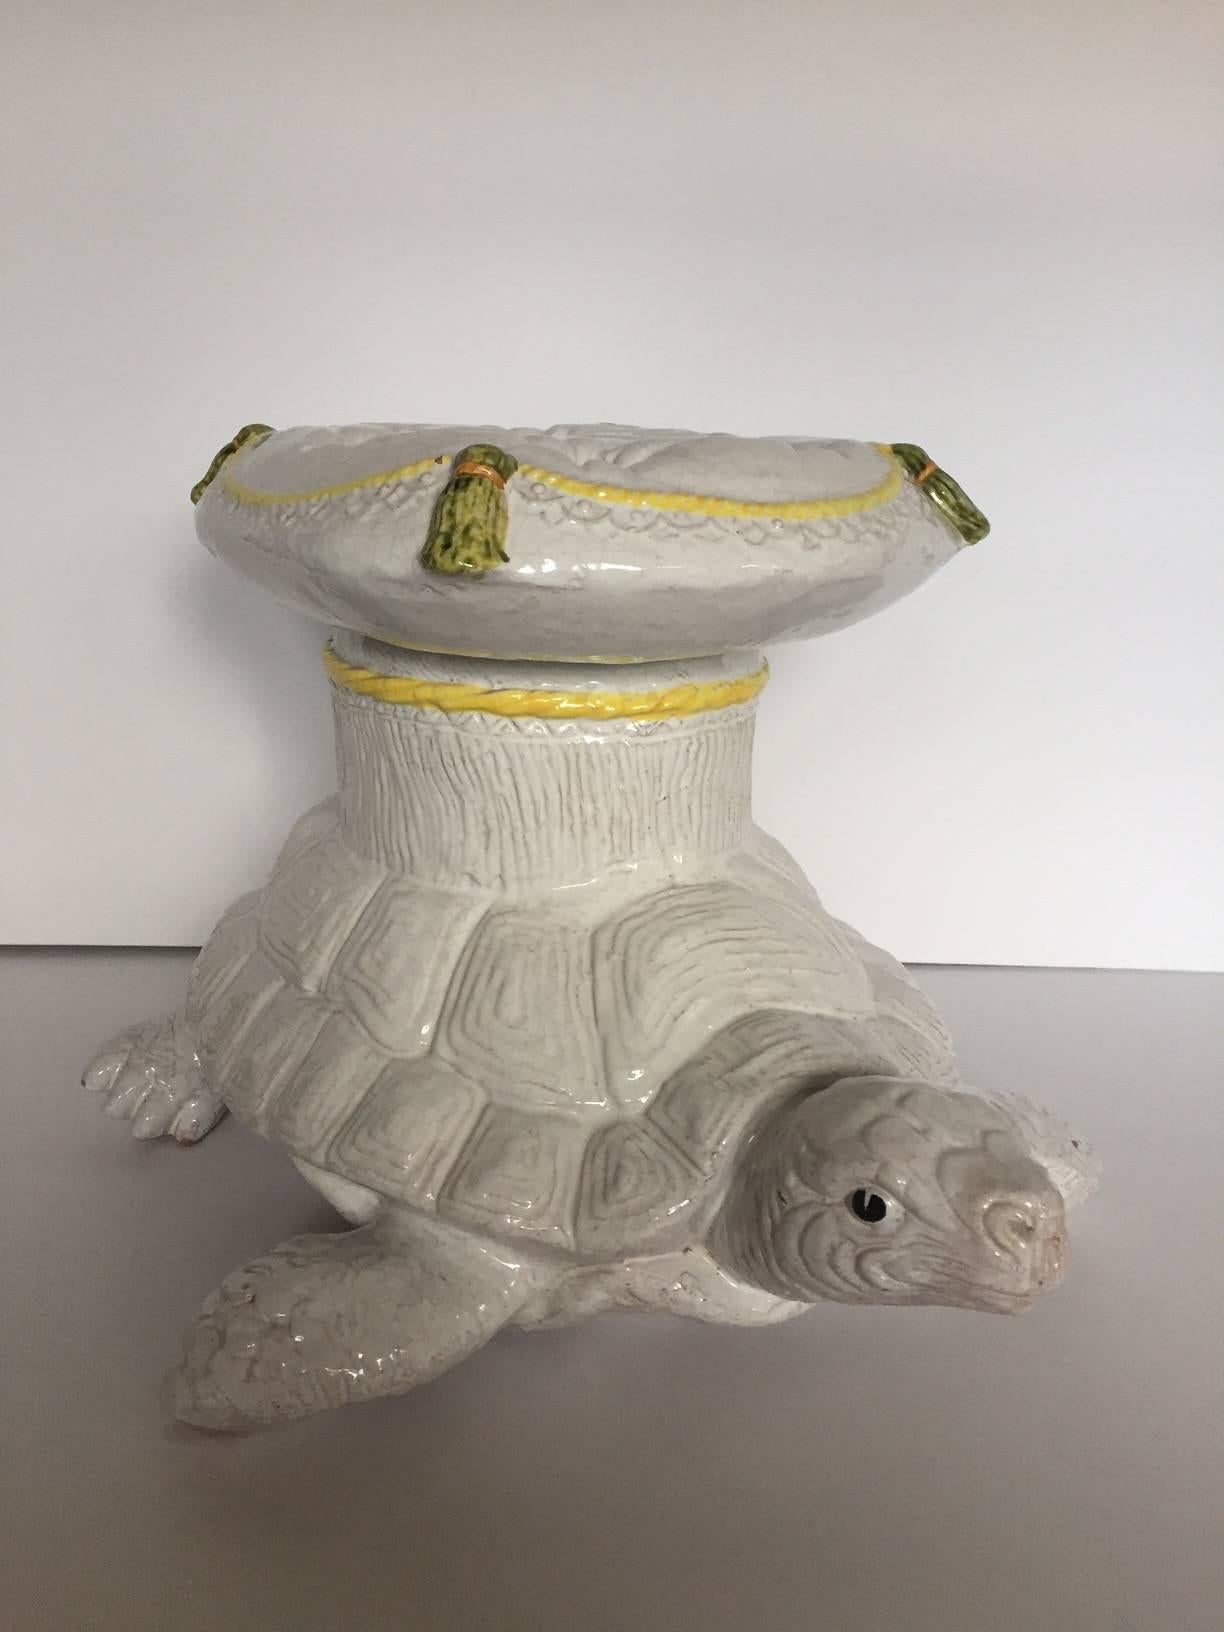 Unusual form for a vintage garden seat in the shape of a turtle with tufted pillow top, all in cream ceramic with yellow, gold and green details. Makes a whimsical extra seat or glamorous drinks table.